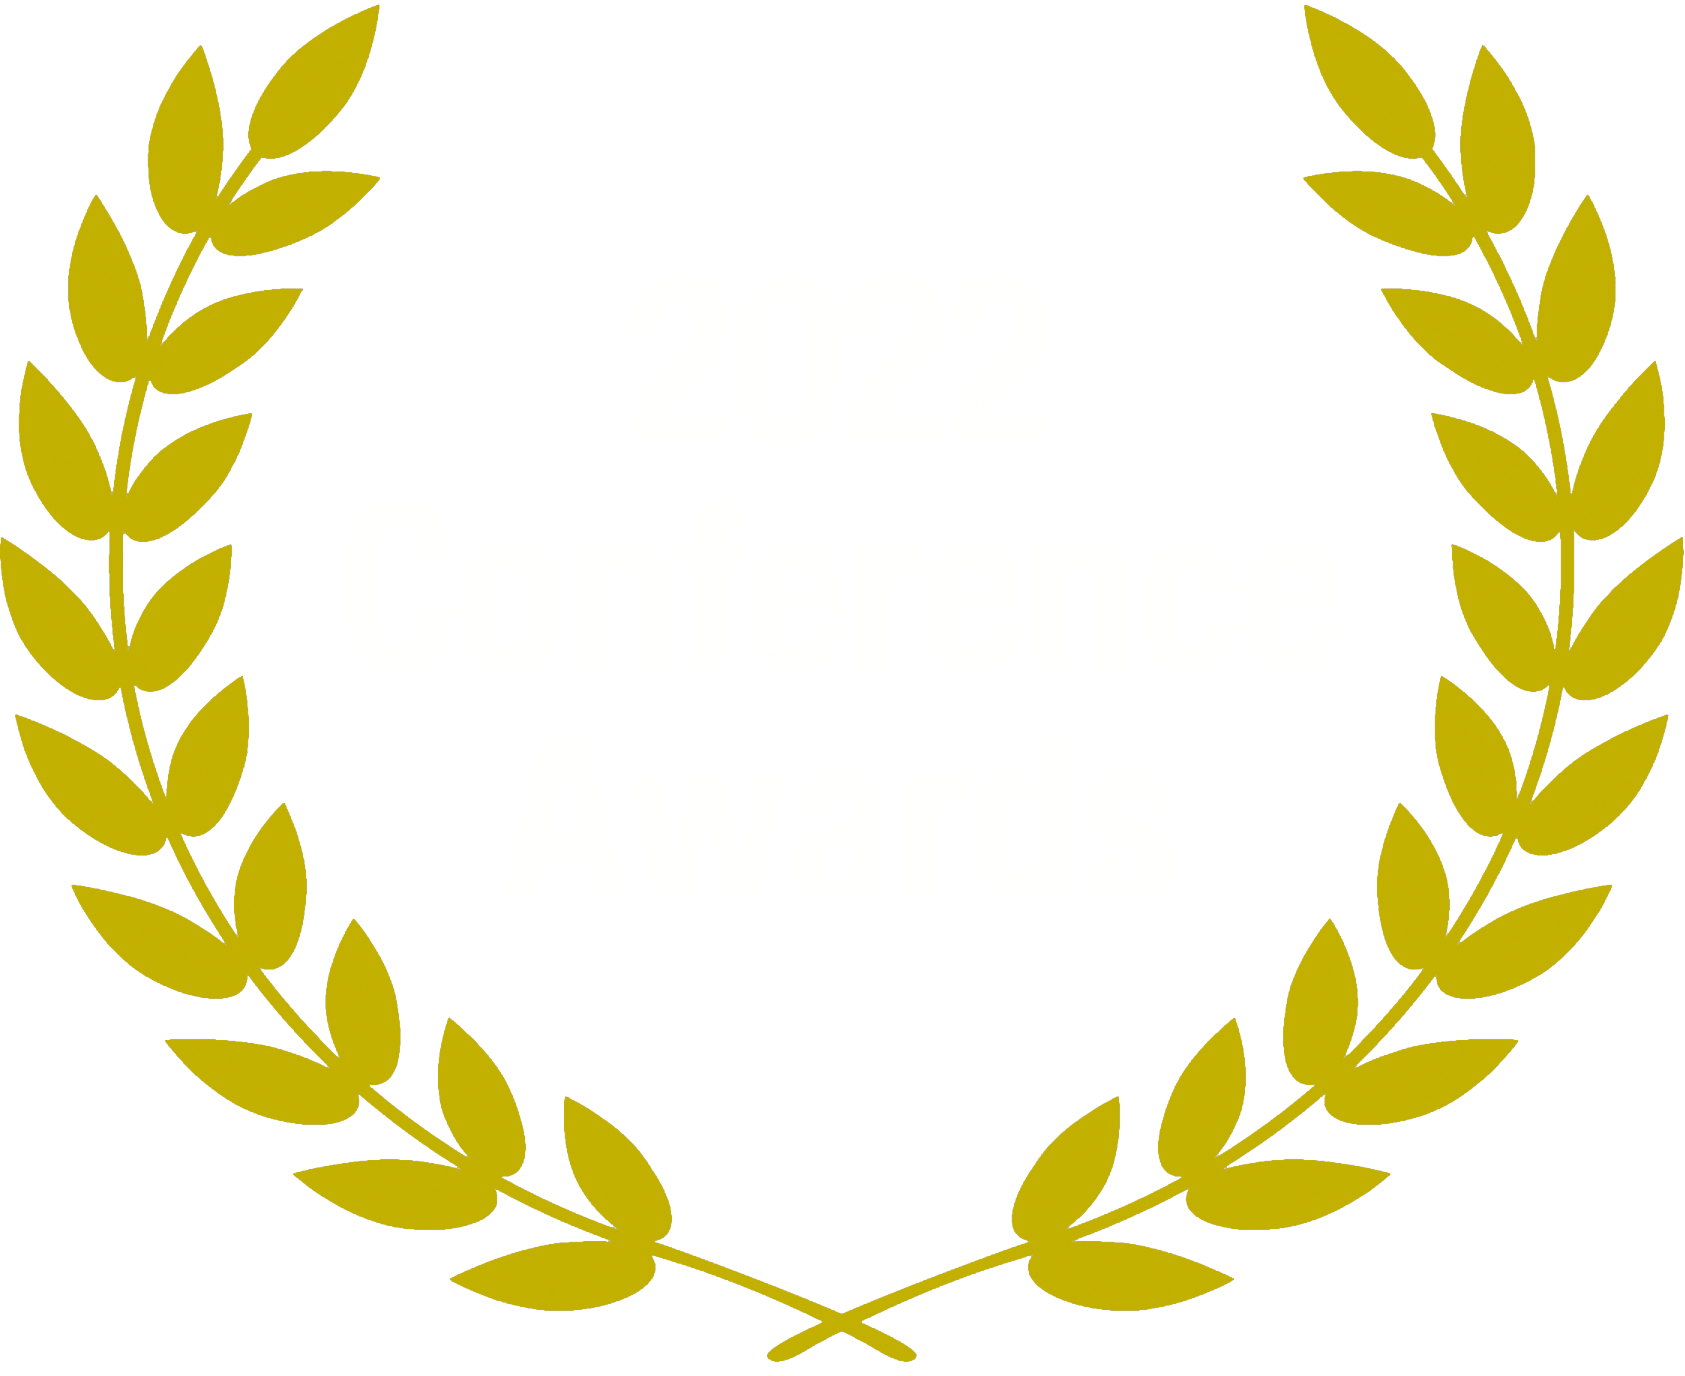 2022 Conference Awards